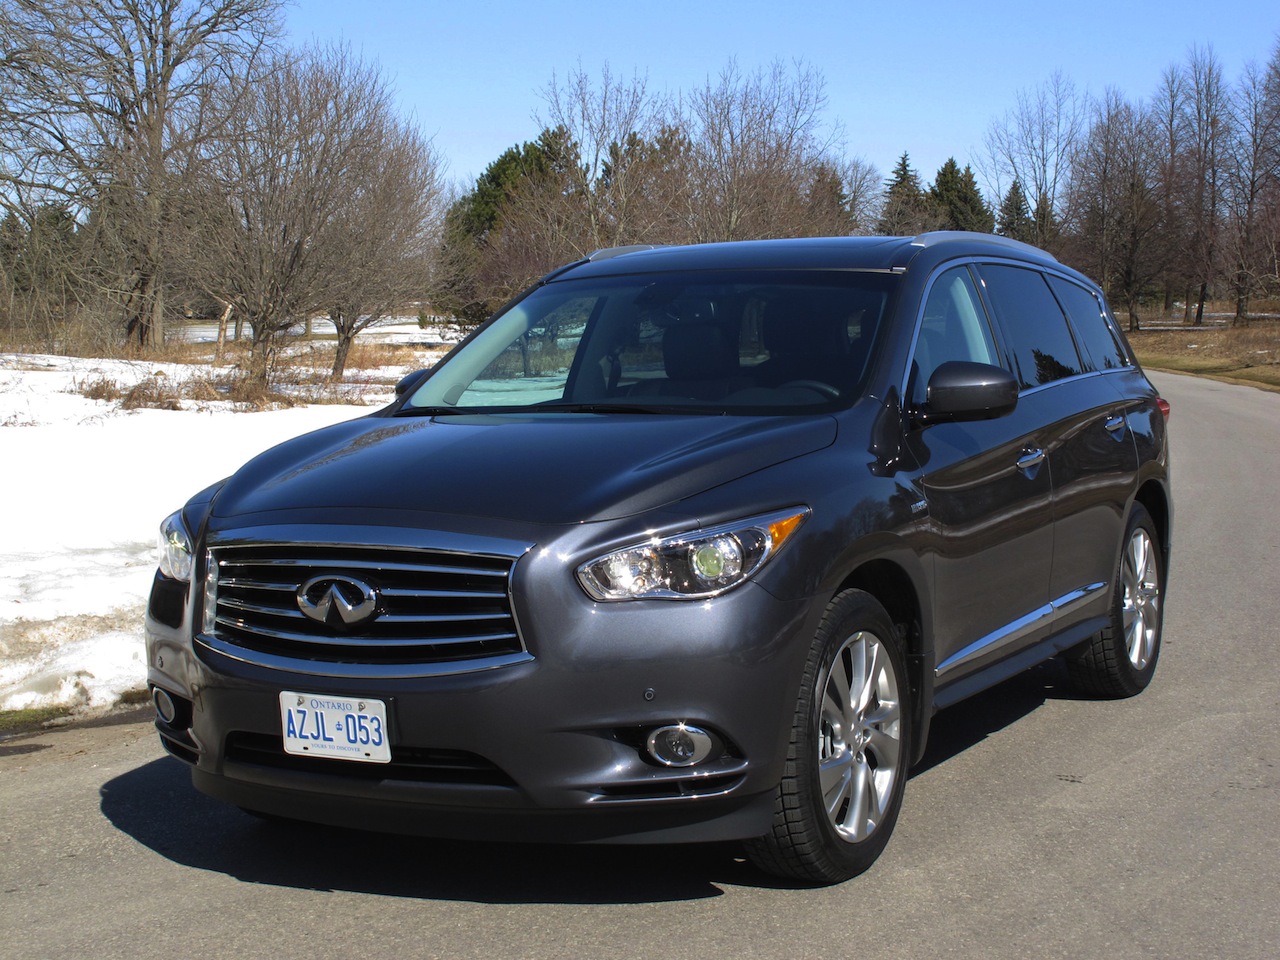 2014 Infiniti QX60 Hybrid Review - Cars, Photos, Test Drives, and Reviews |  Canadian Auto Review